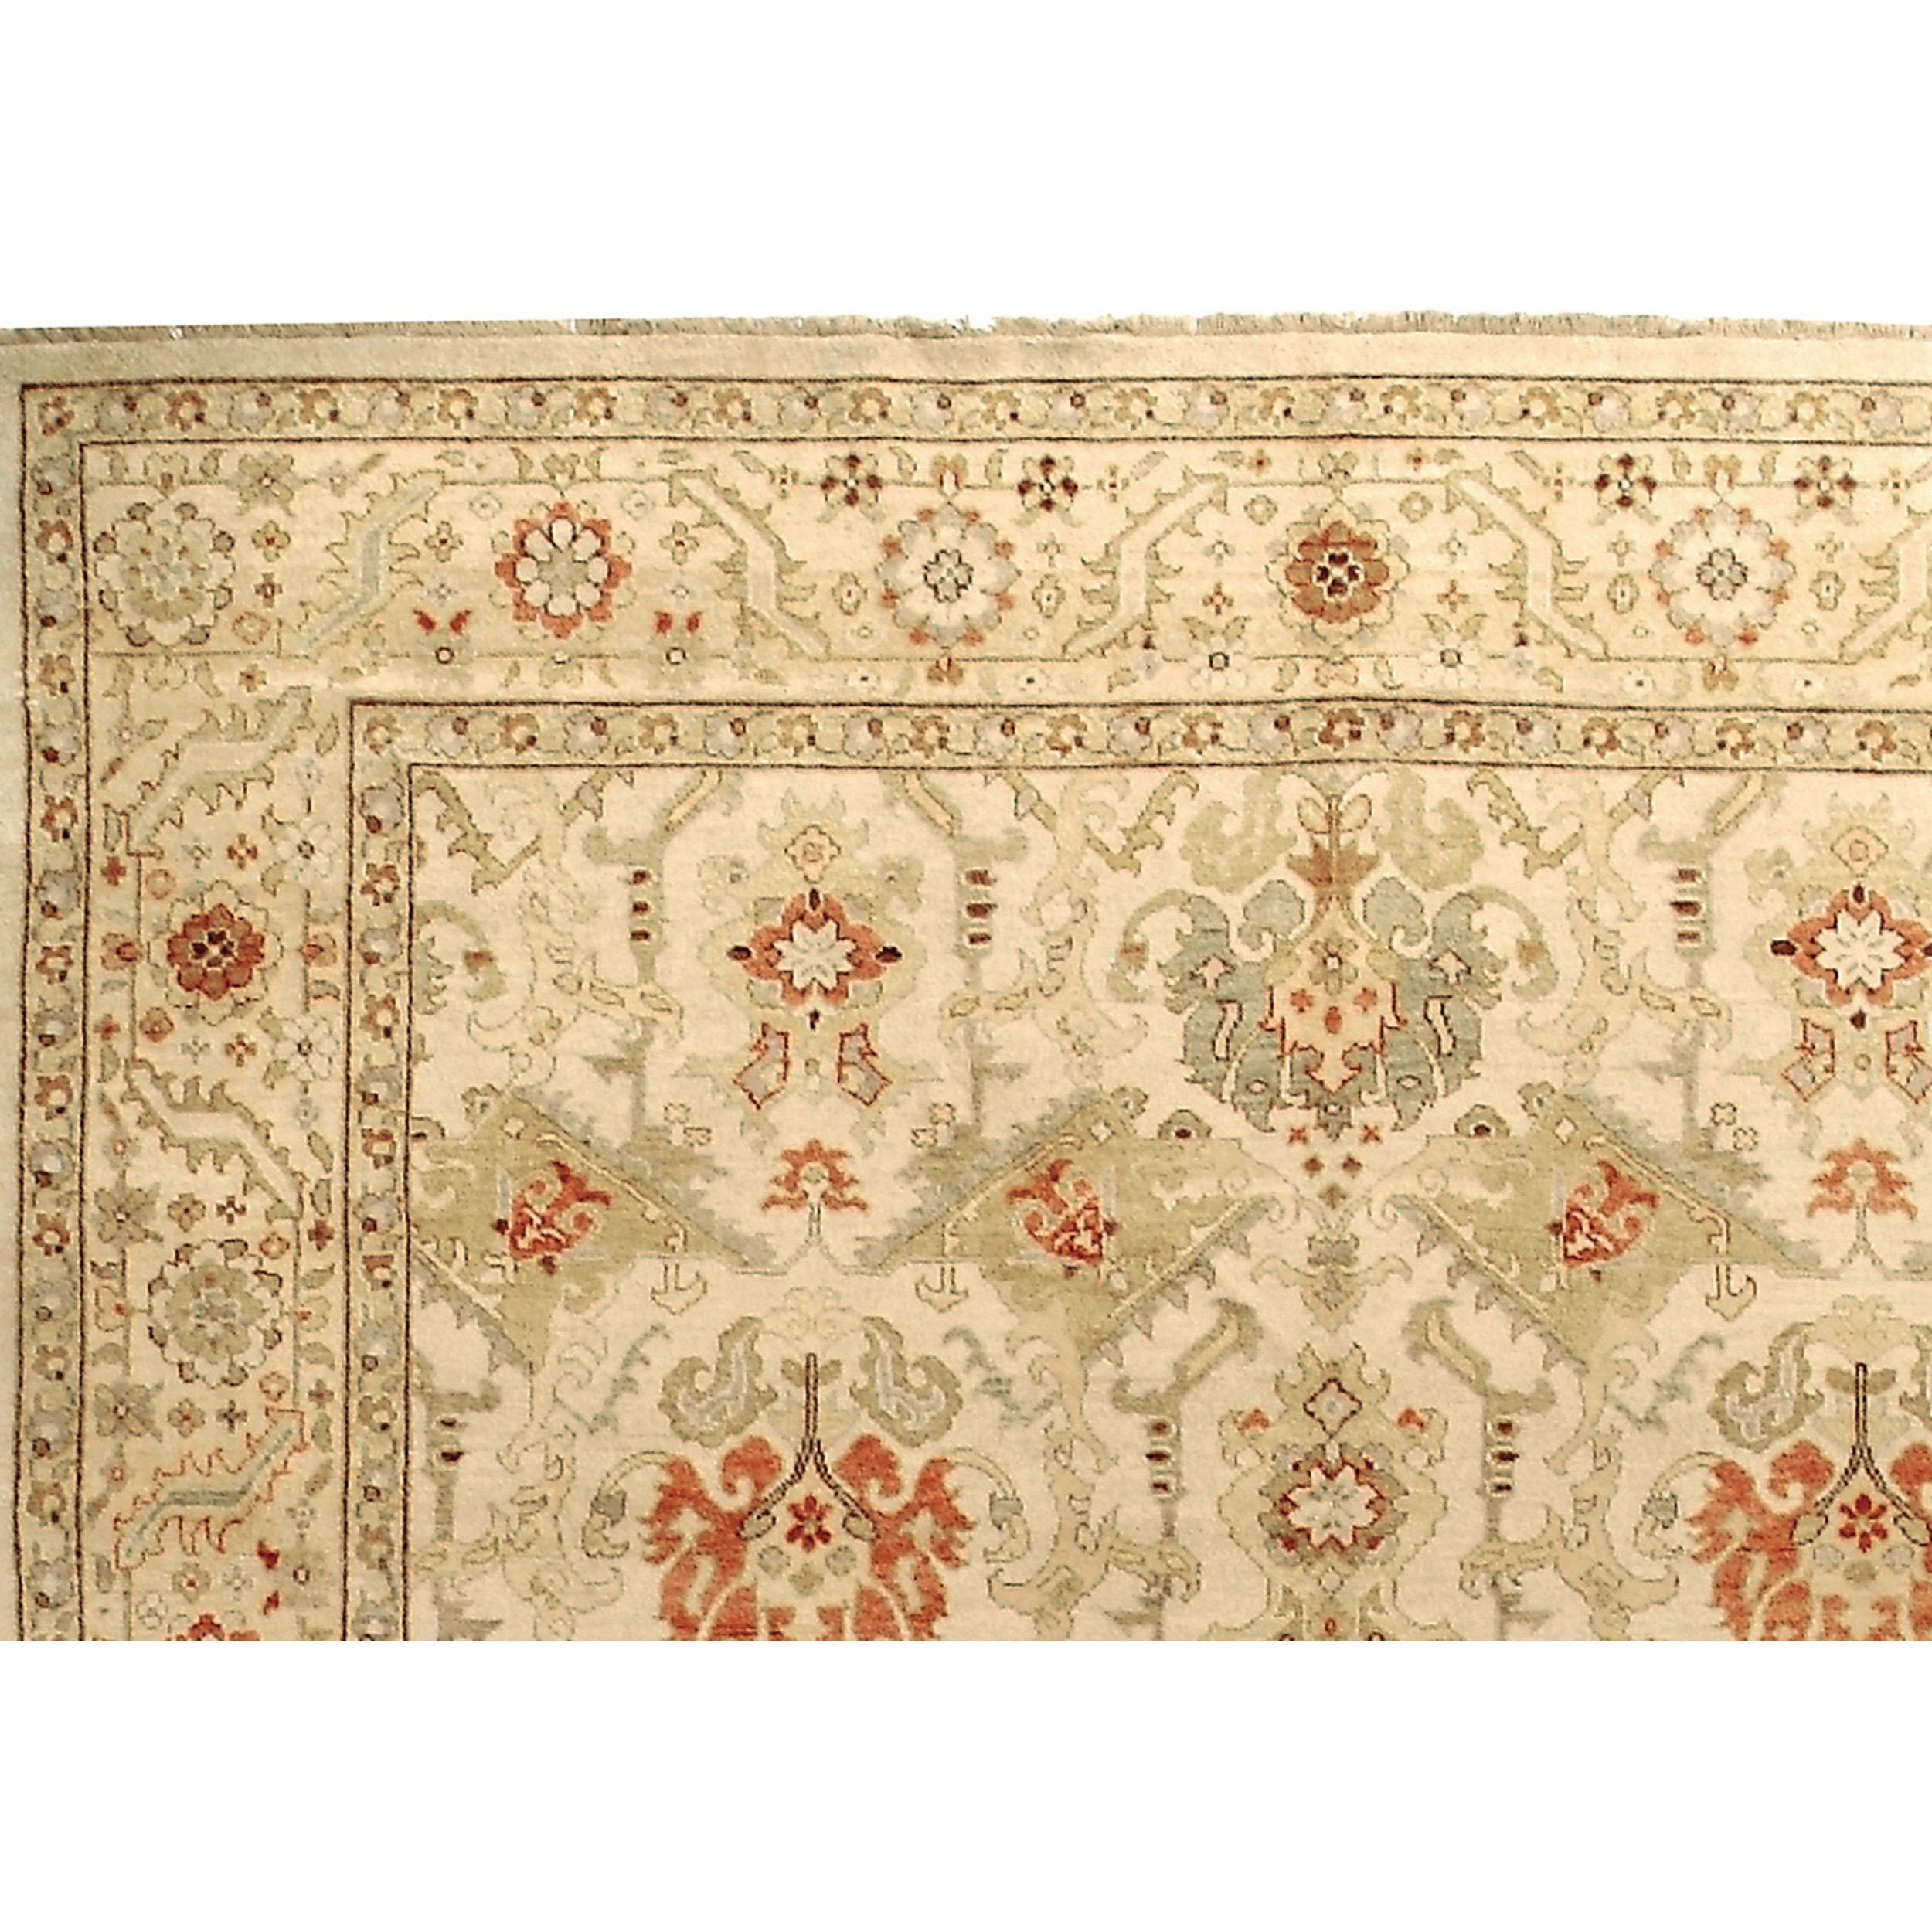 A luxurious traditional hand-knotted rug, which has been meticulously crafted, is made from the finest wool. This rug transcends its utilitarian purpose, becoming a work of art that delights the senses and harmonizes perfectly with a variety of home